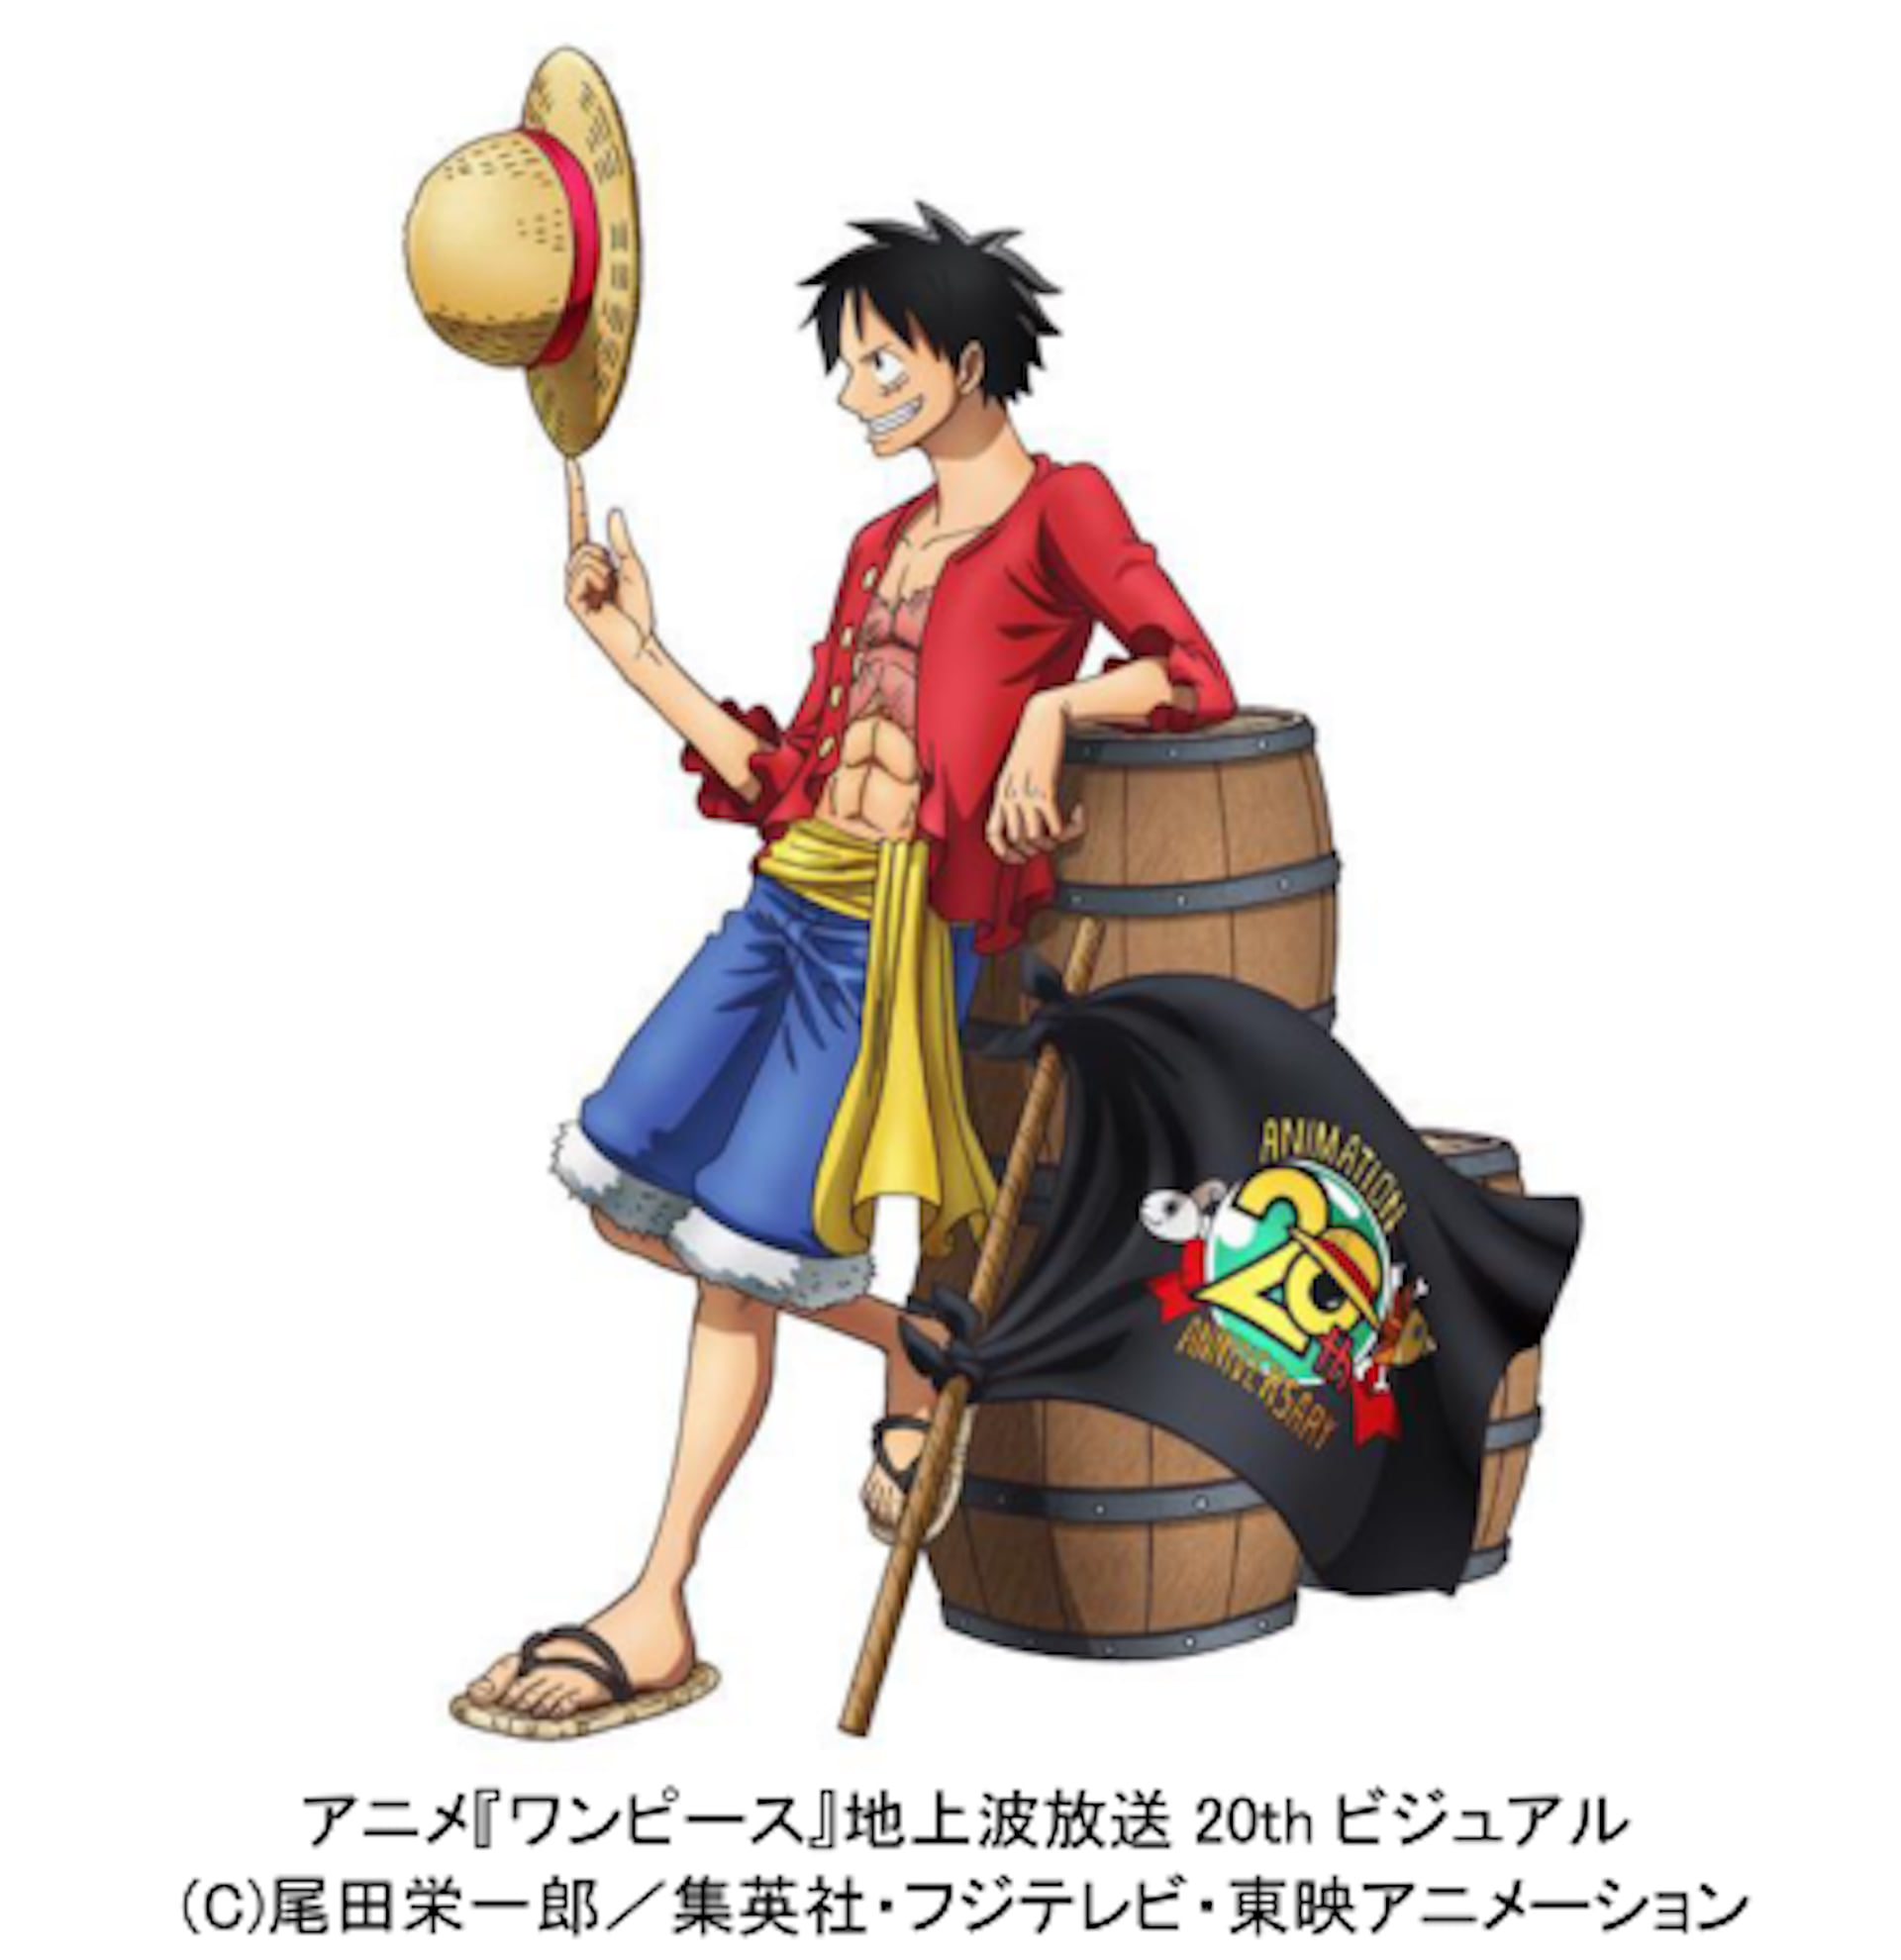 『ONE PIECE STAMPEDE』公開を前に“あの名場面をもう一度”『ワンピース』FODにて1～130話が無料配信｜放送開始20周年記念 video190708onepiece-fod_2-1920x1980